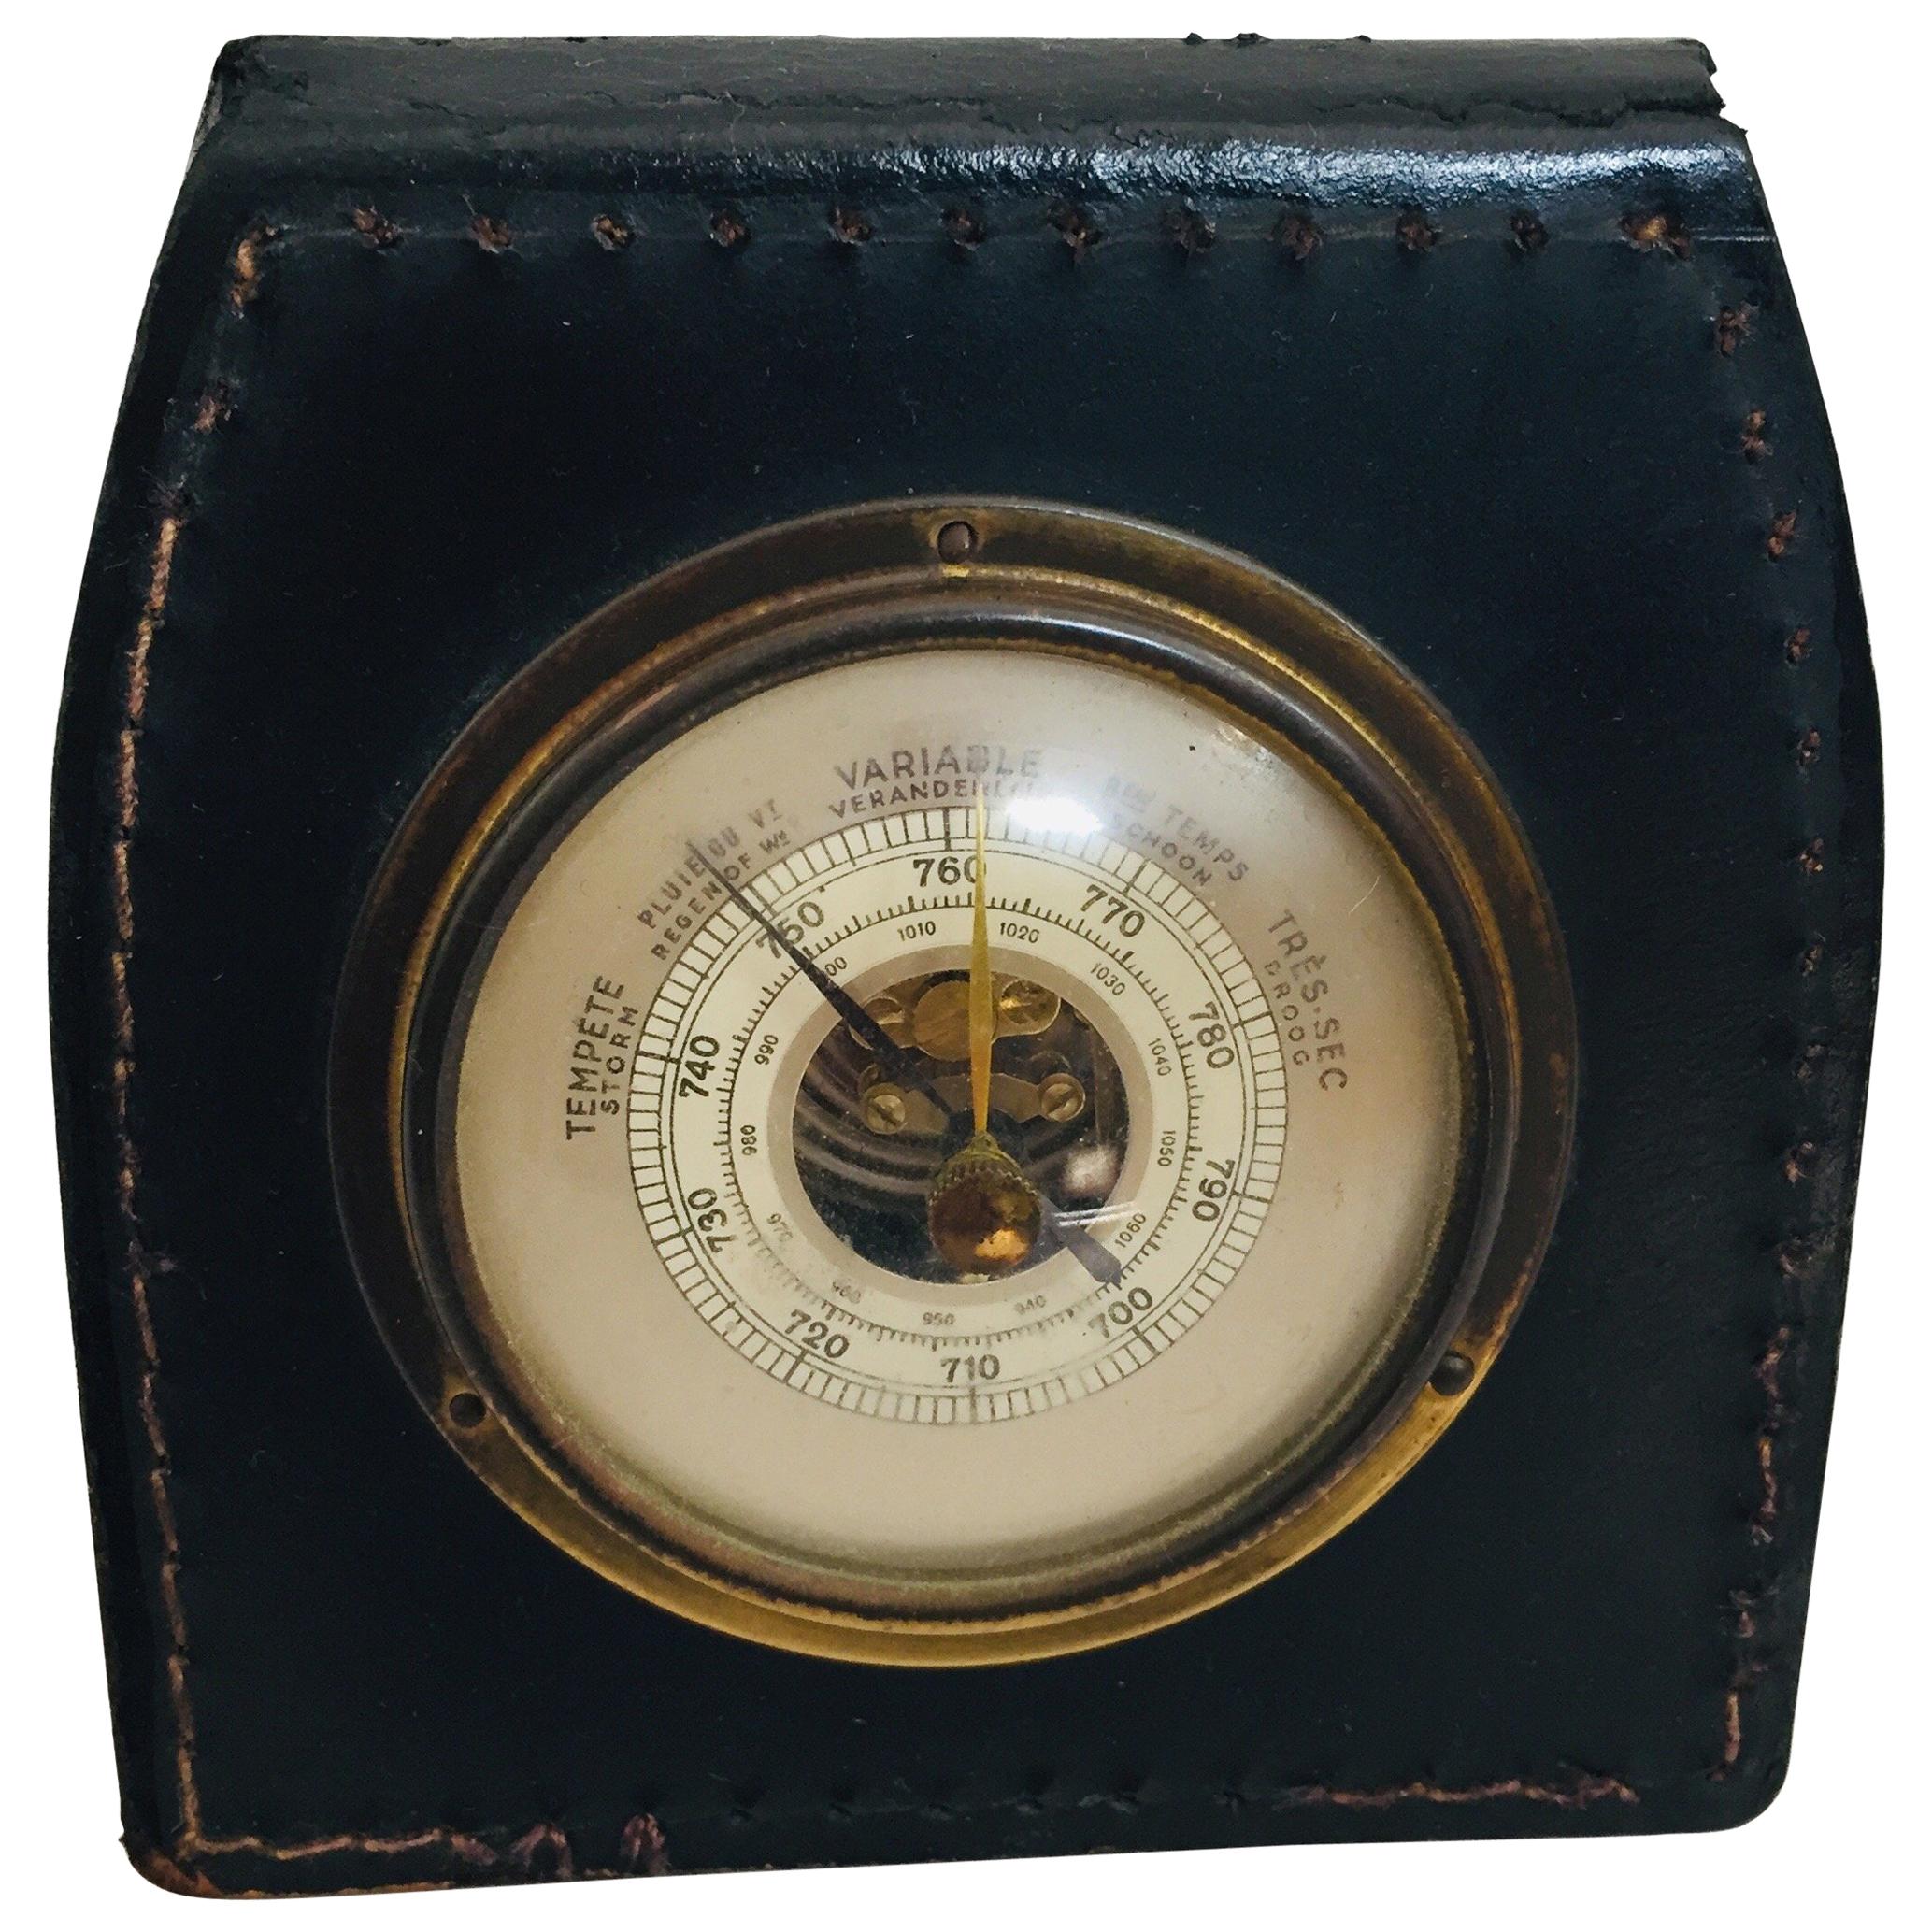 Brass Barometer with Readings in French Wrapped in Black Leather, Adnet Style